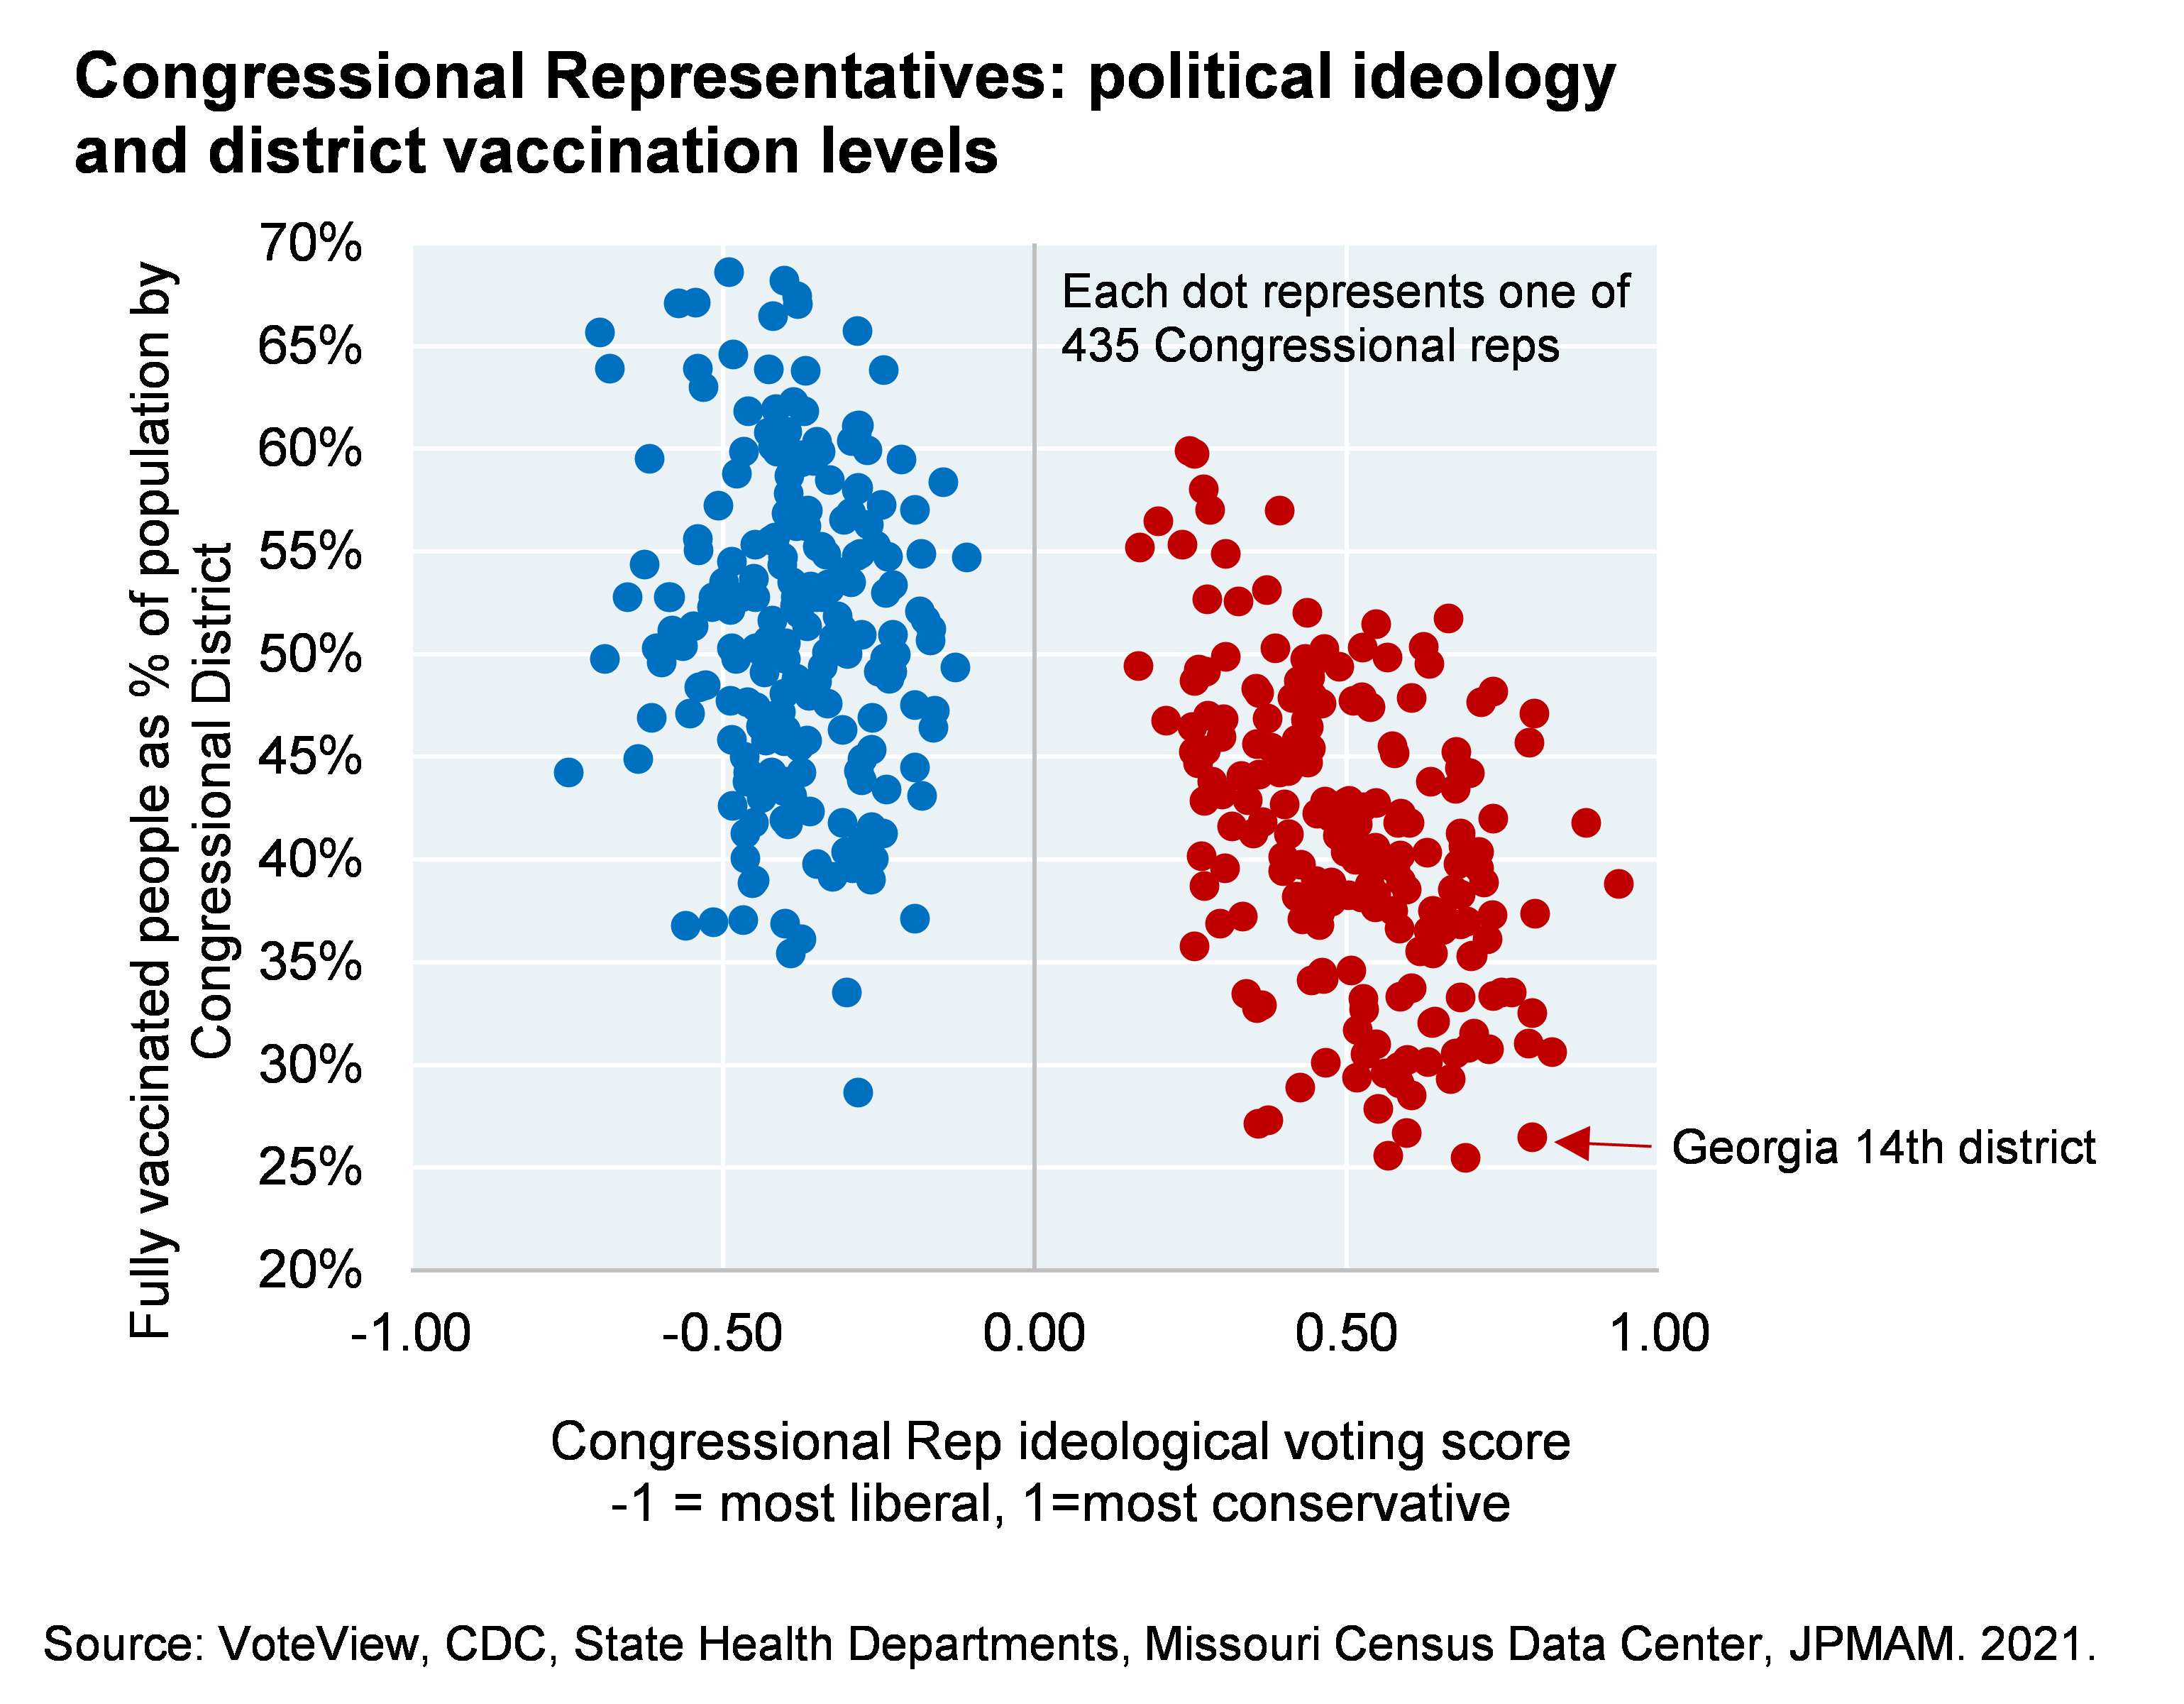 Scatter plot shows fully vaccinated people as a percentage of Congressional District population vs the political ideological voting score of the Congressional Representative of that area, where -1 equals the most liberal score and 1 equals the most conservative score. While US vaccine resistance is not the sole province of one political party, there are some clear ideological factors at work.